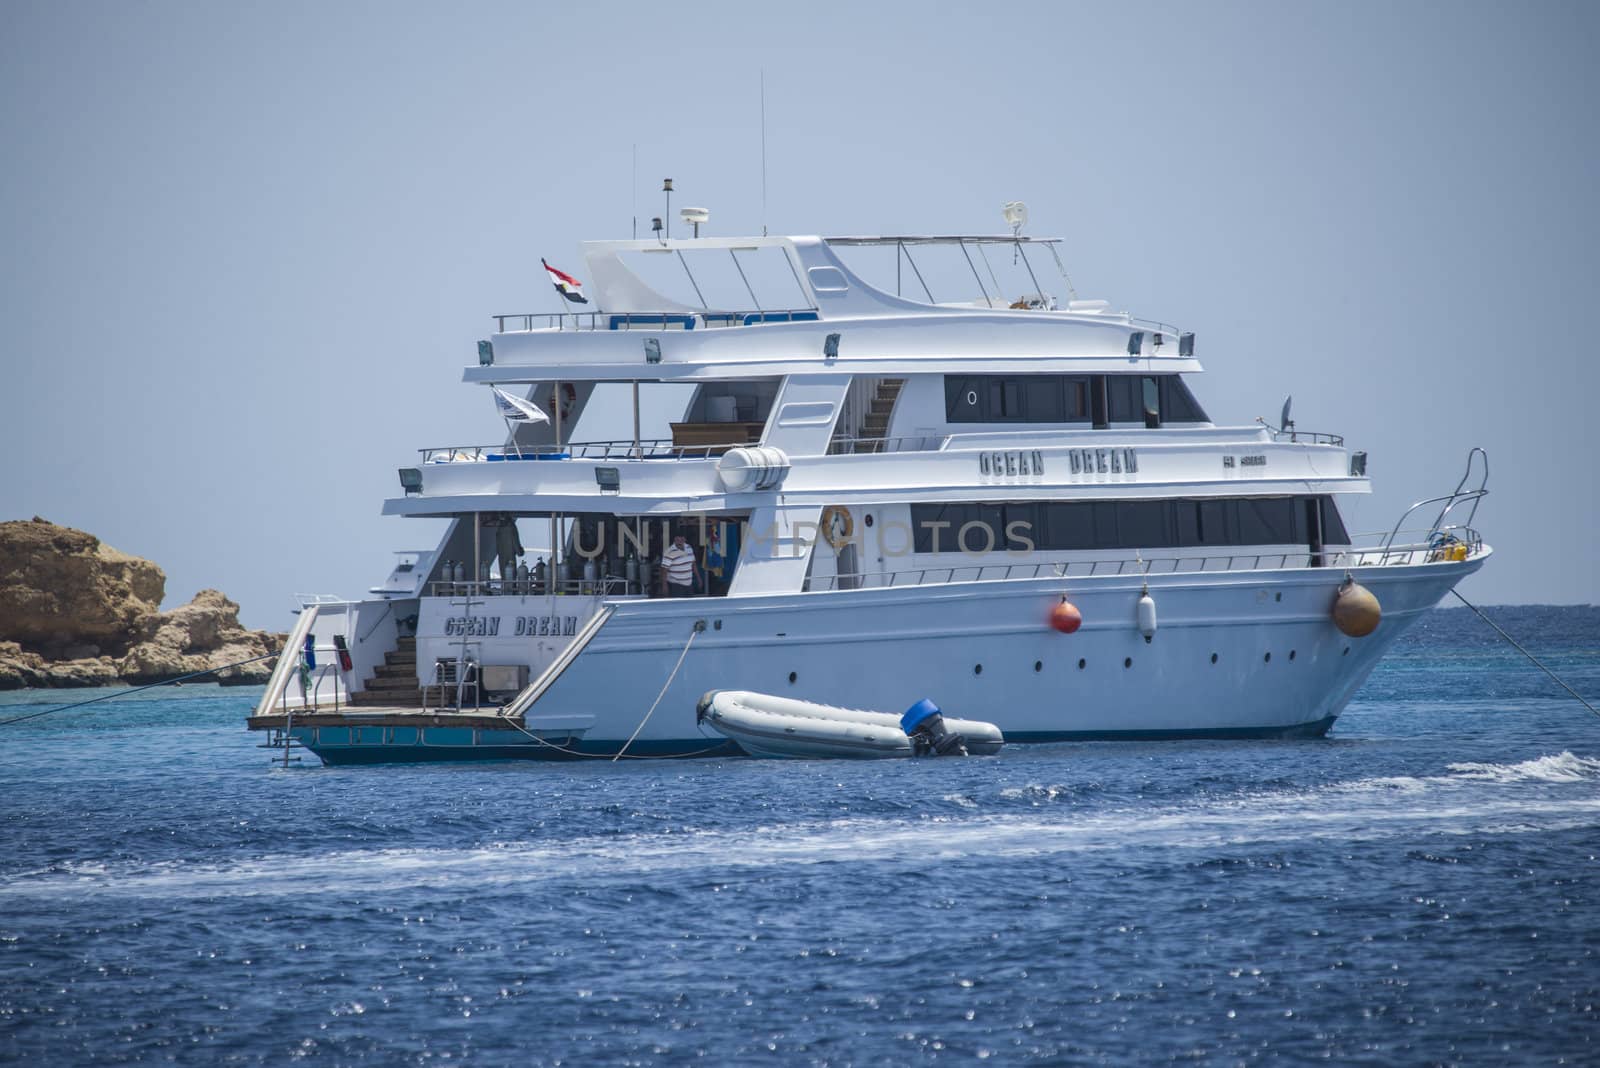 The boat is anchored at the coral reefs in the bay of Sharm el Sheikh, Egypt. The picture is shot one day in April 2013